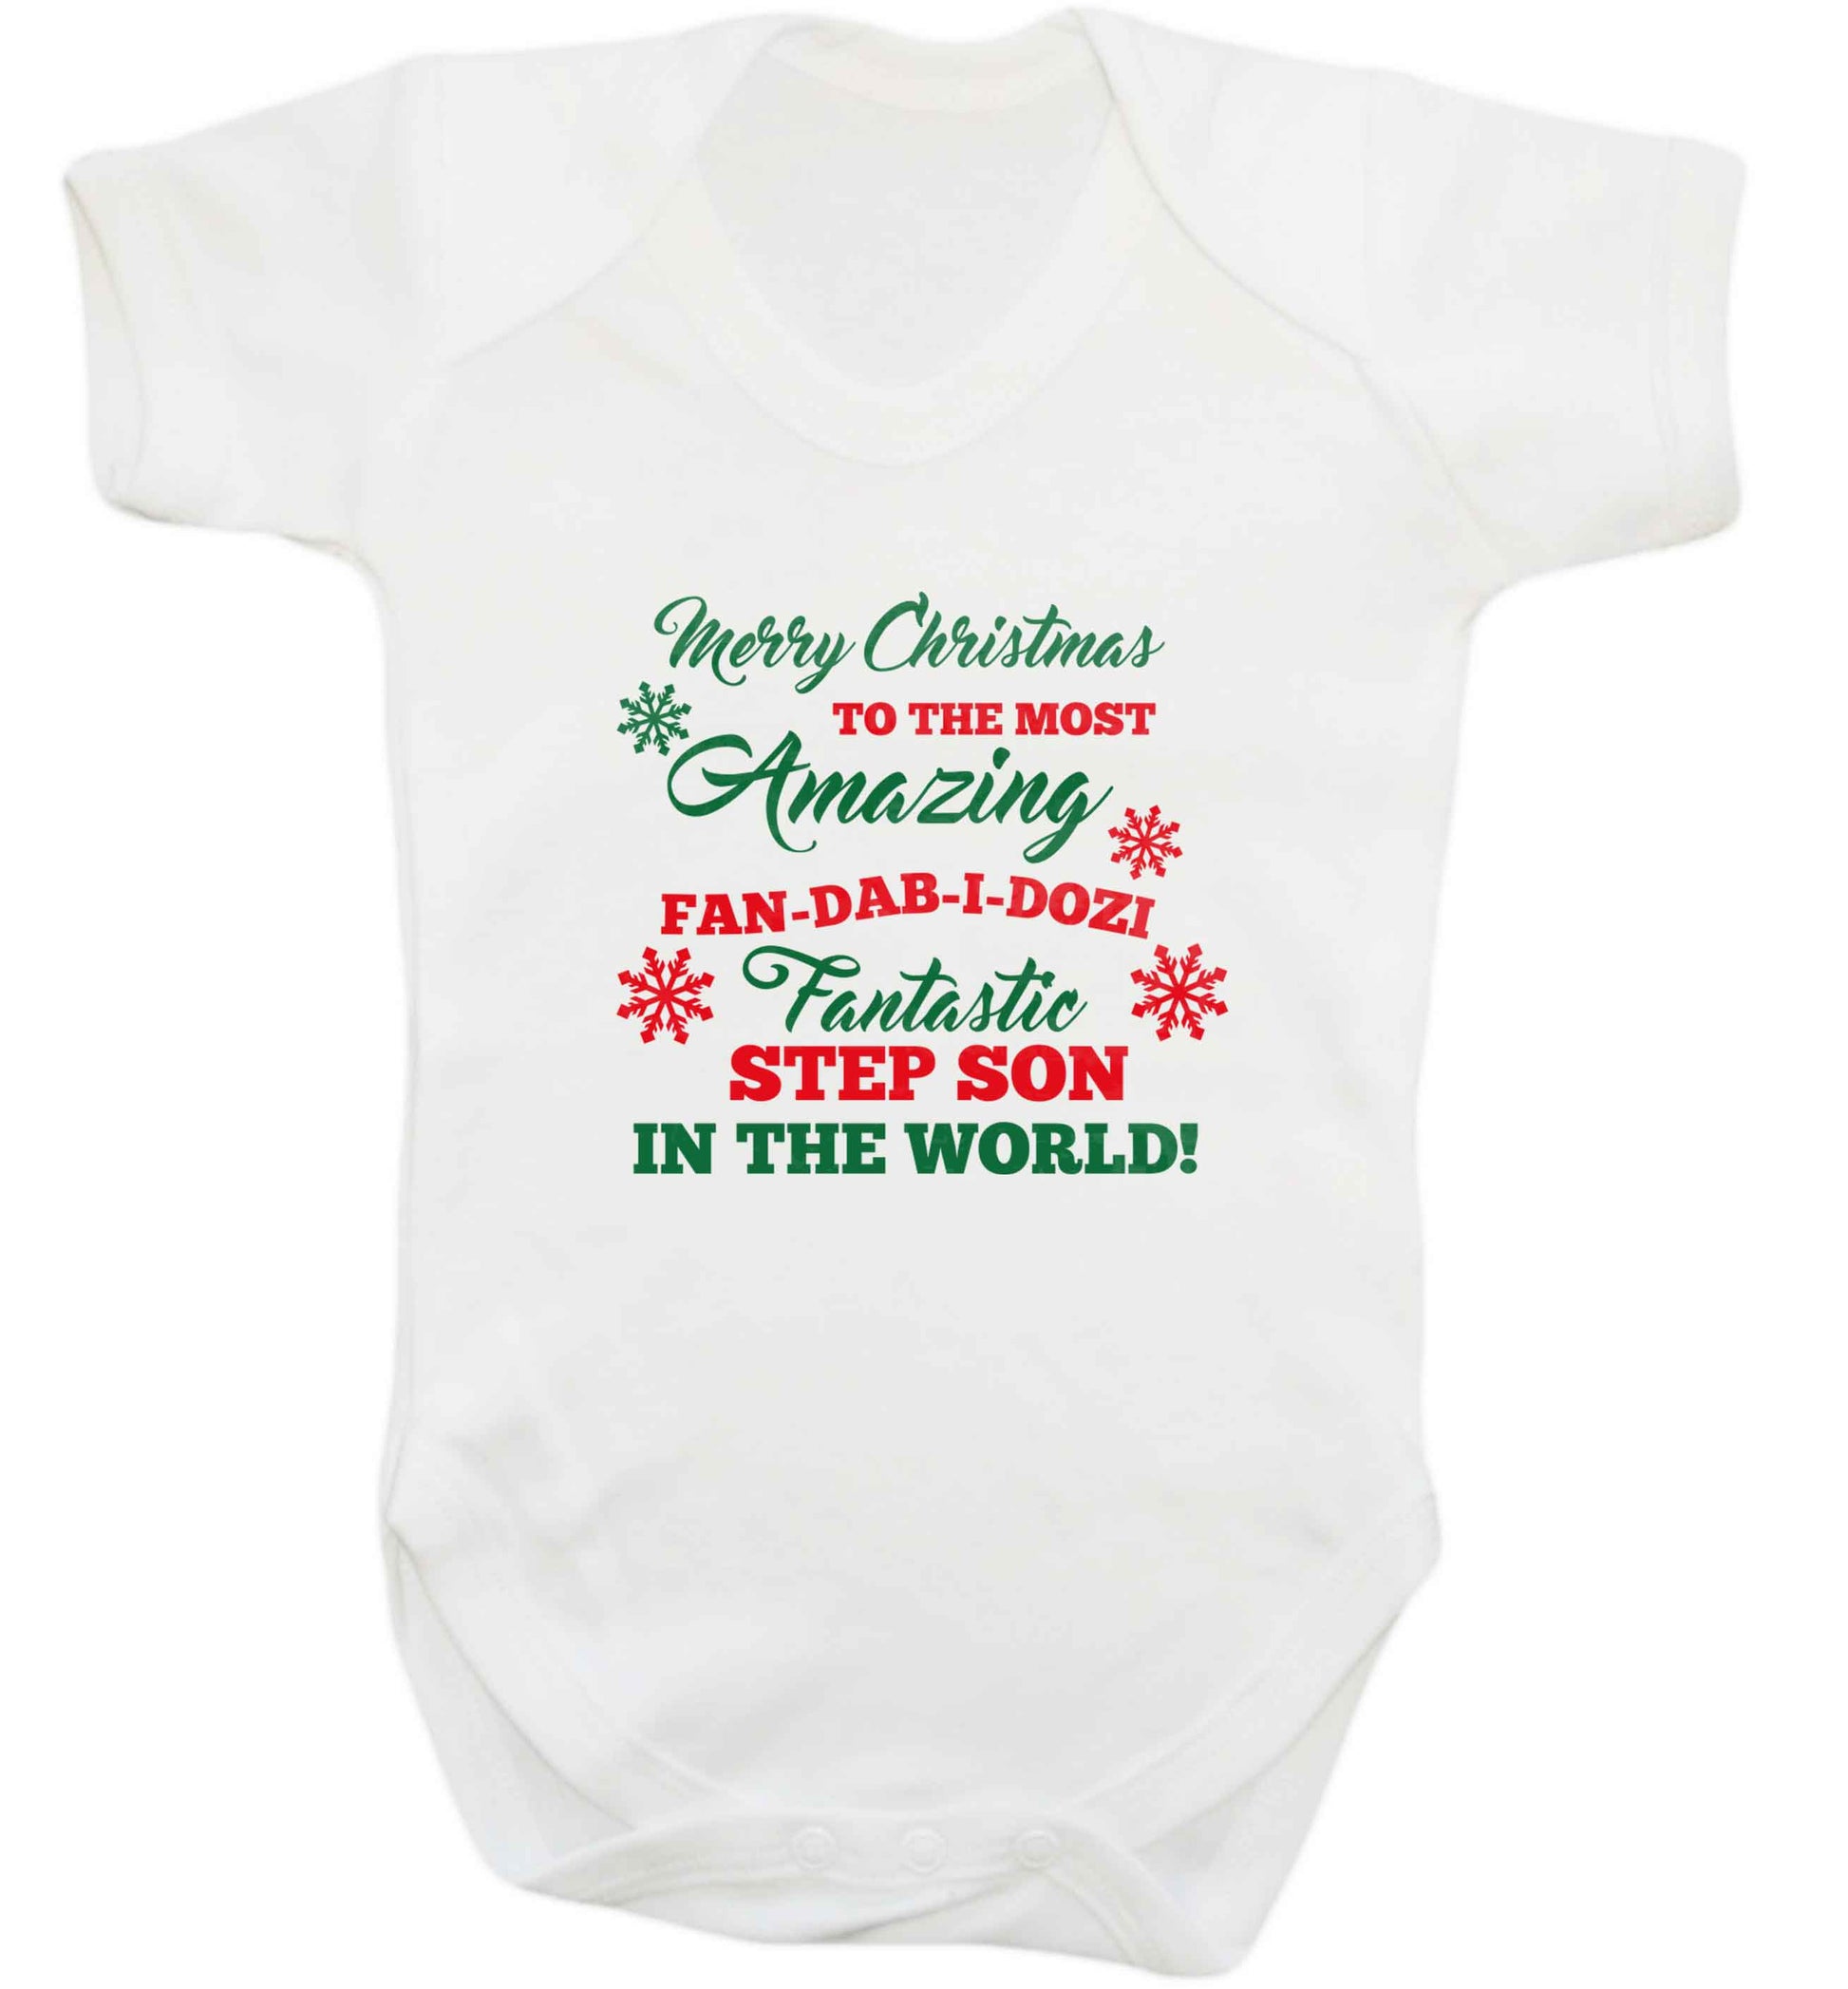 Merry Christmas to the most amazing fan-dab-i-dozi fantasic Step Son in the world baby vest white 18-24 months